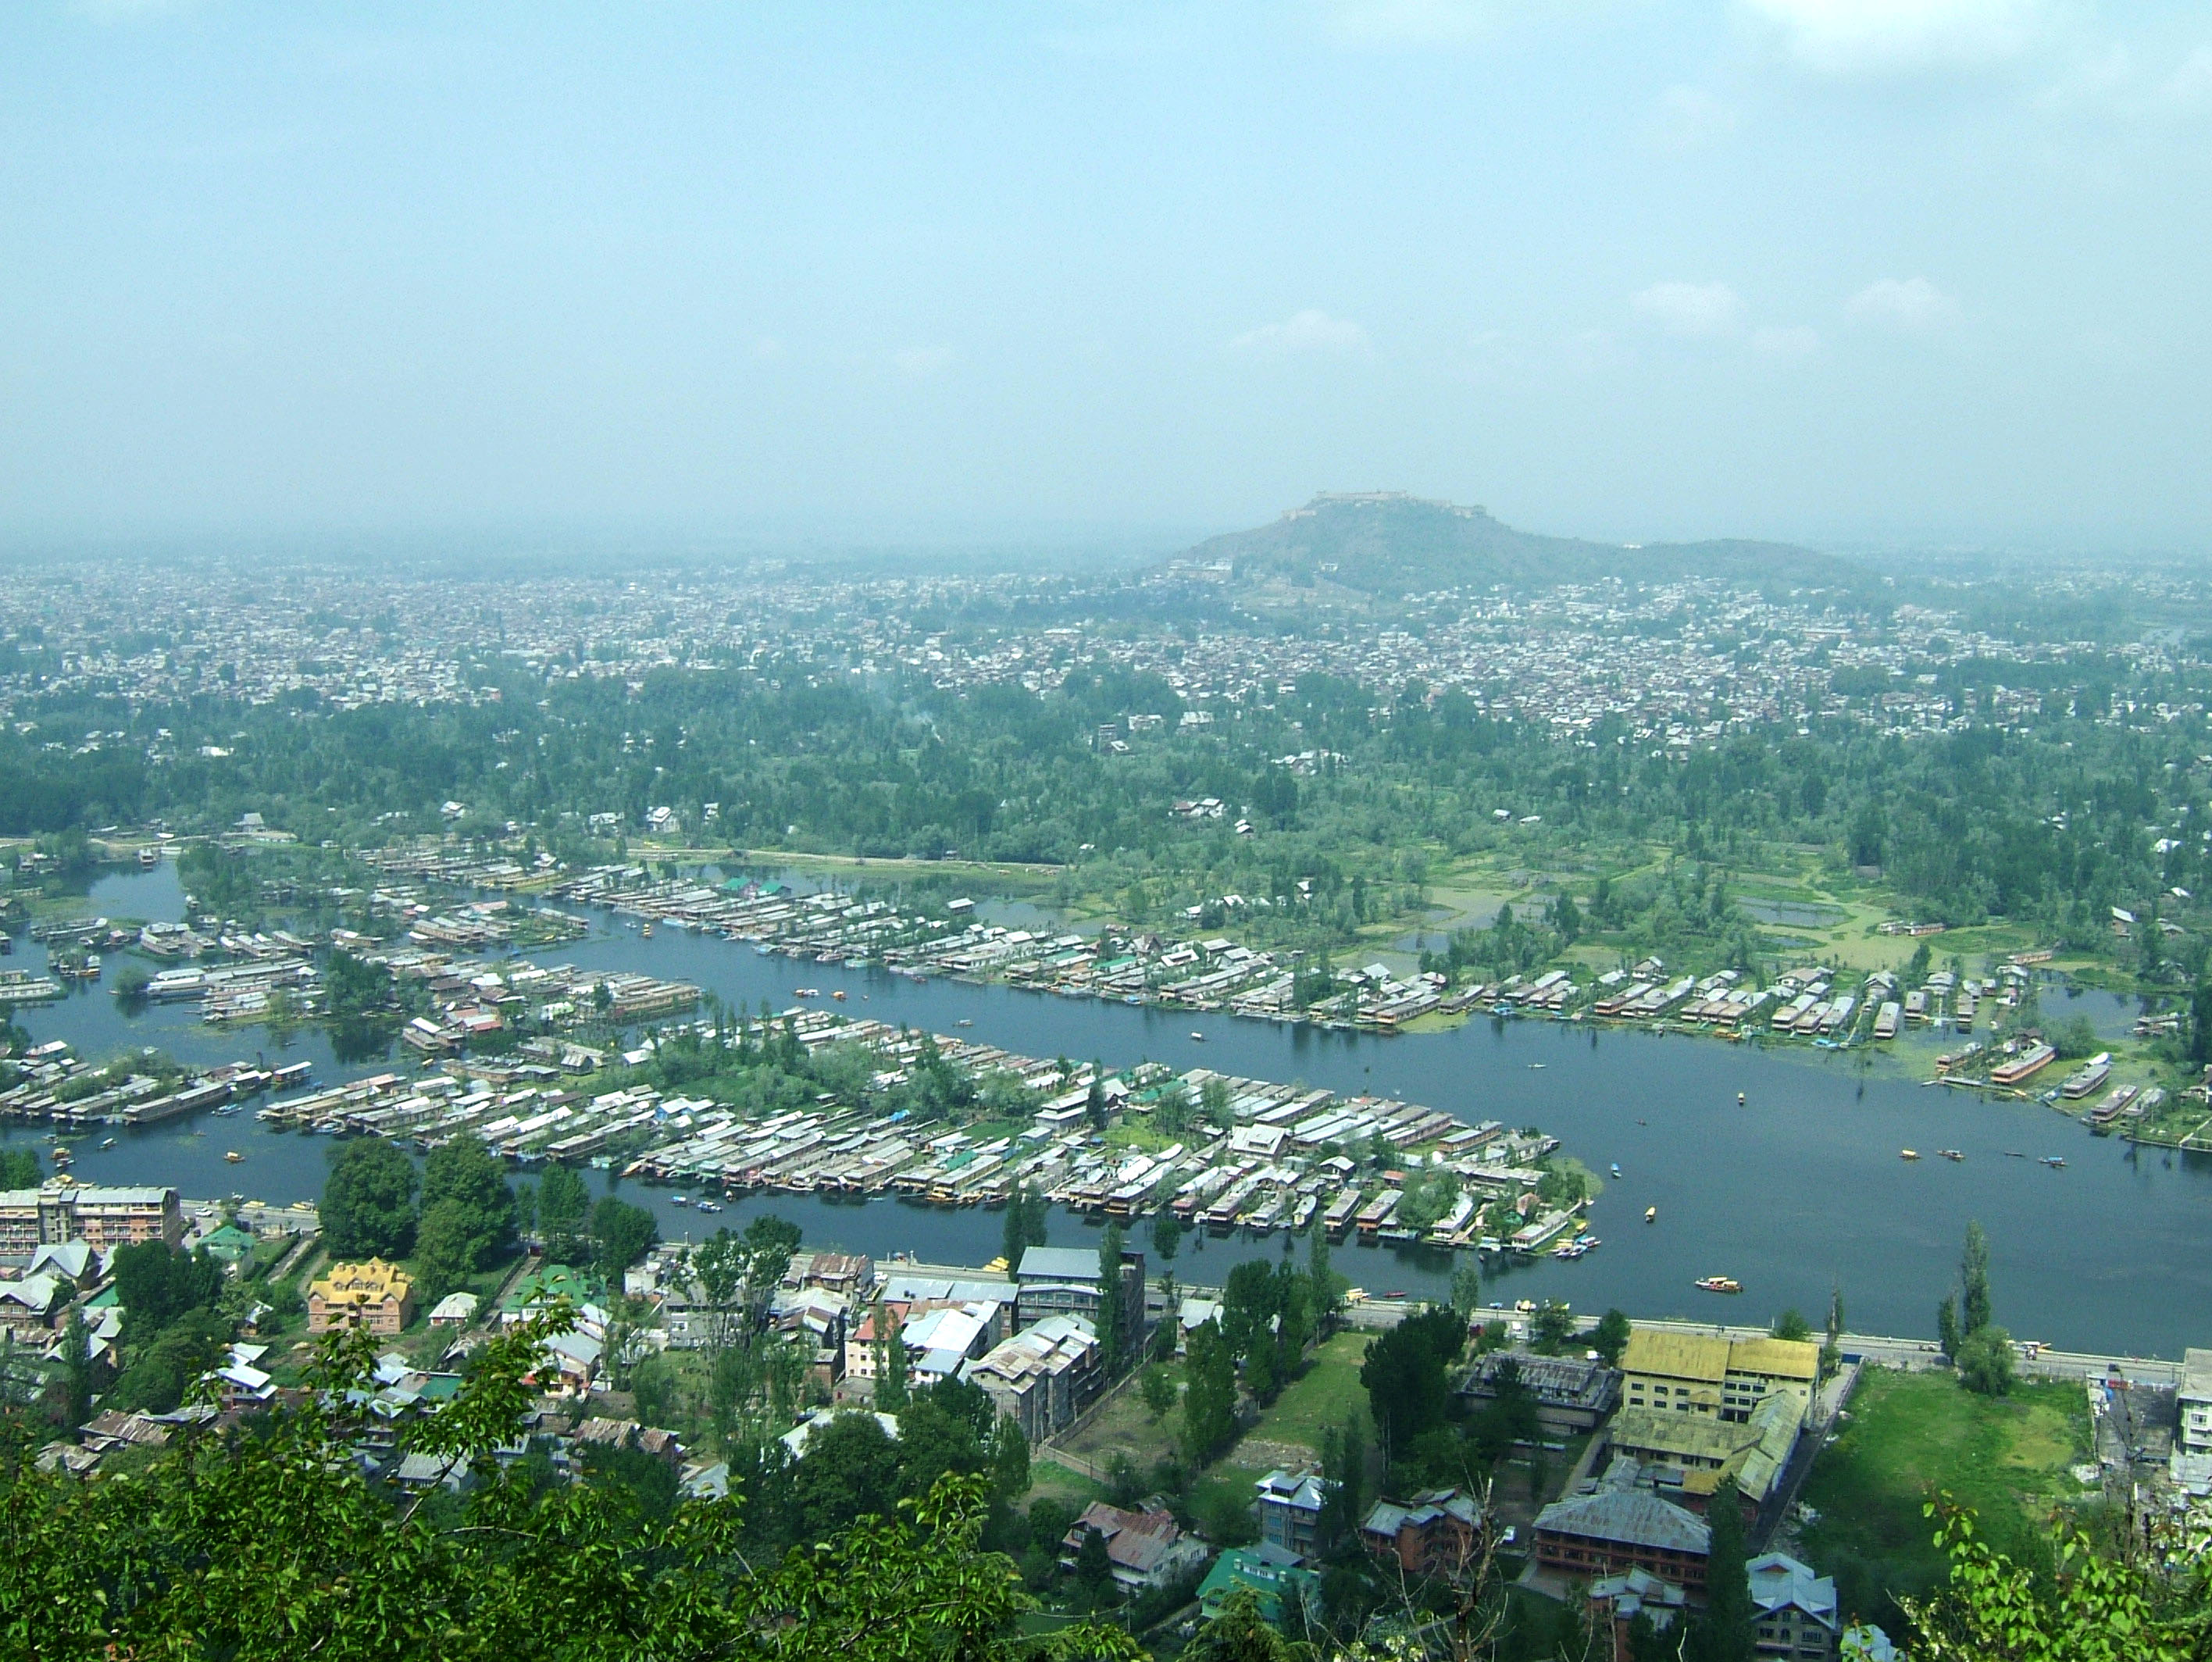 Kashmir panoramic view of Dal Lake and the city of Srinagar India Apr 2008 02